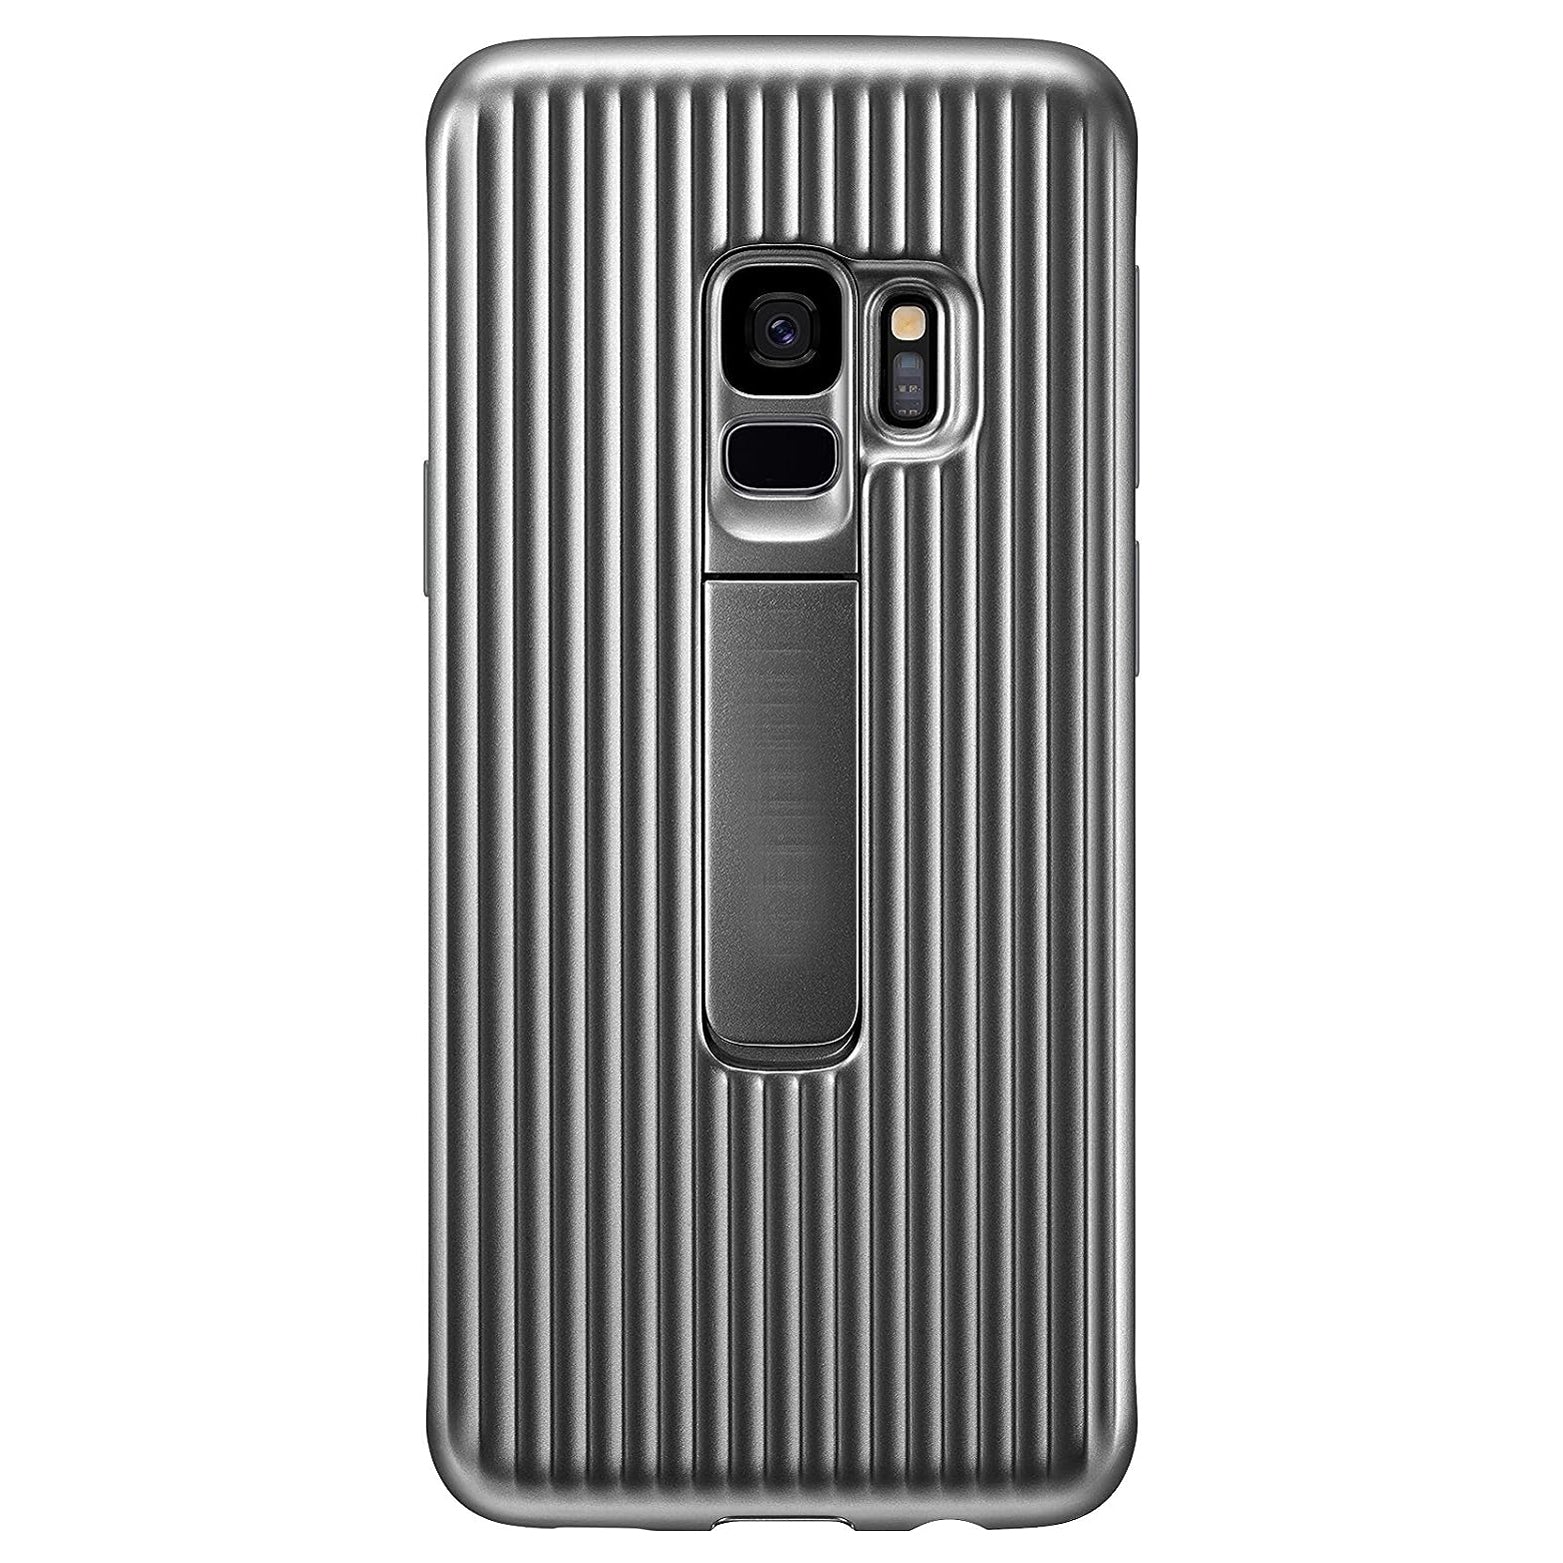 Samsung S8 Standing Cover Case